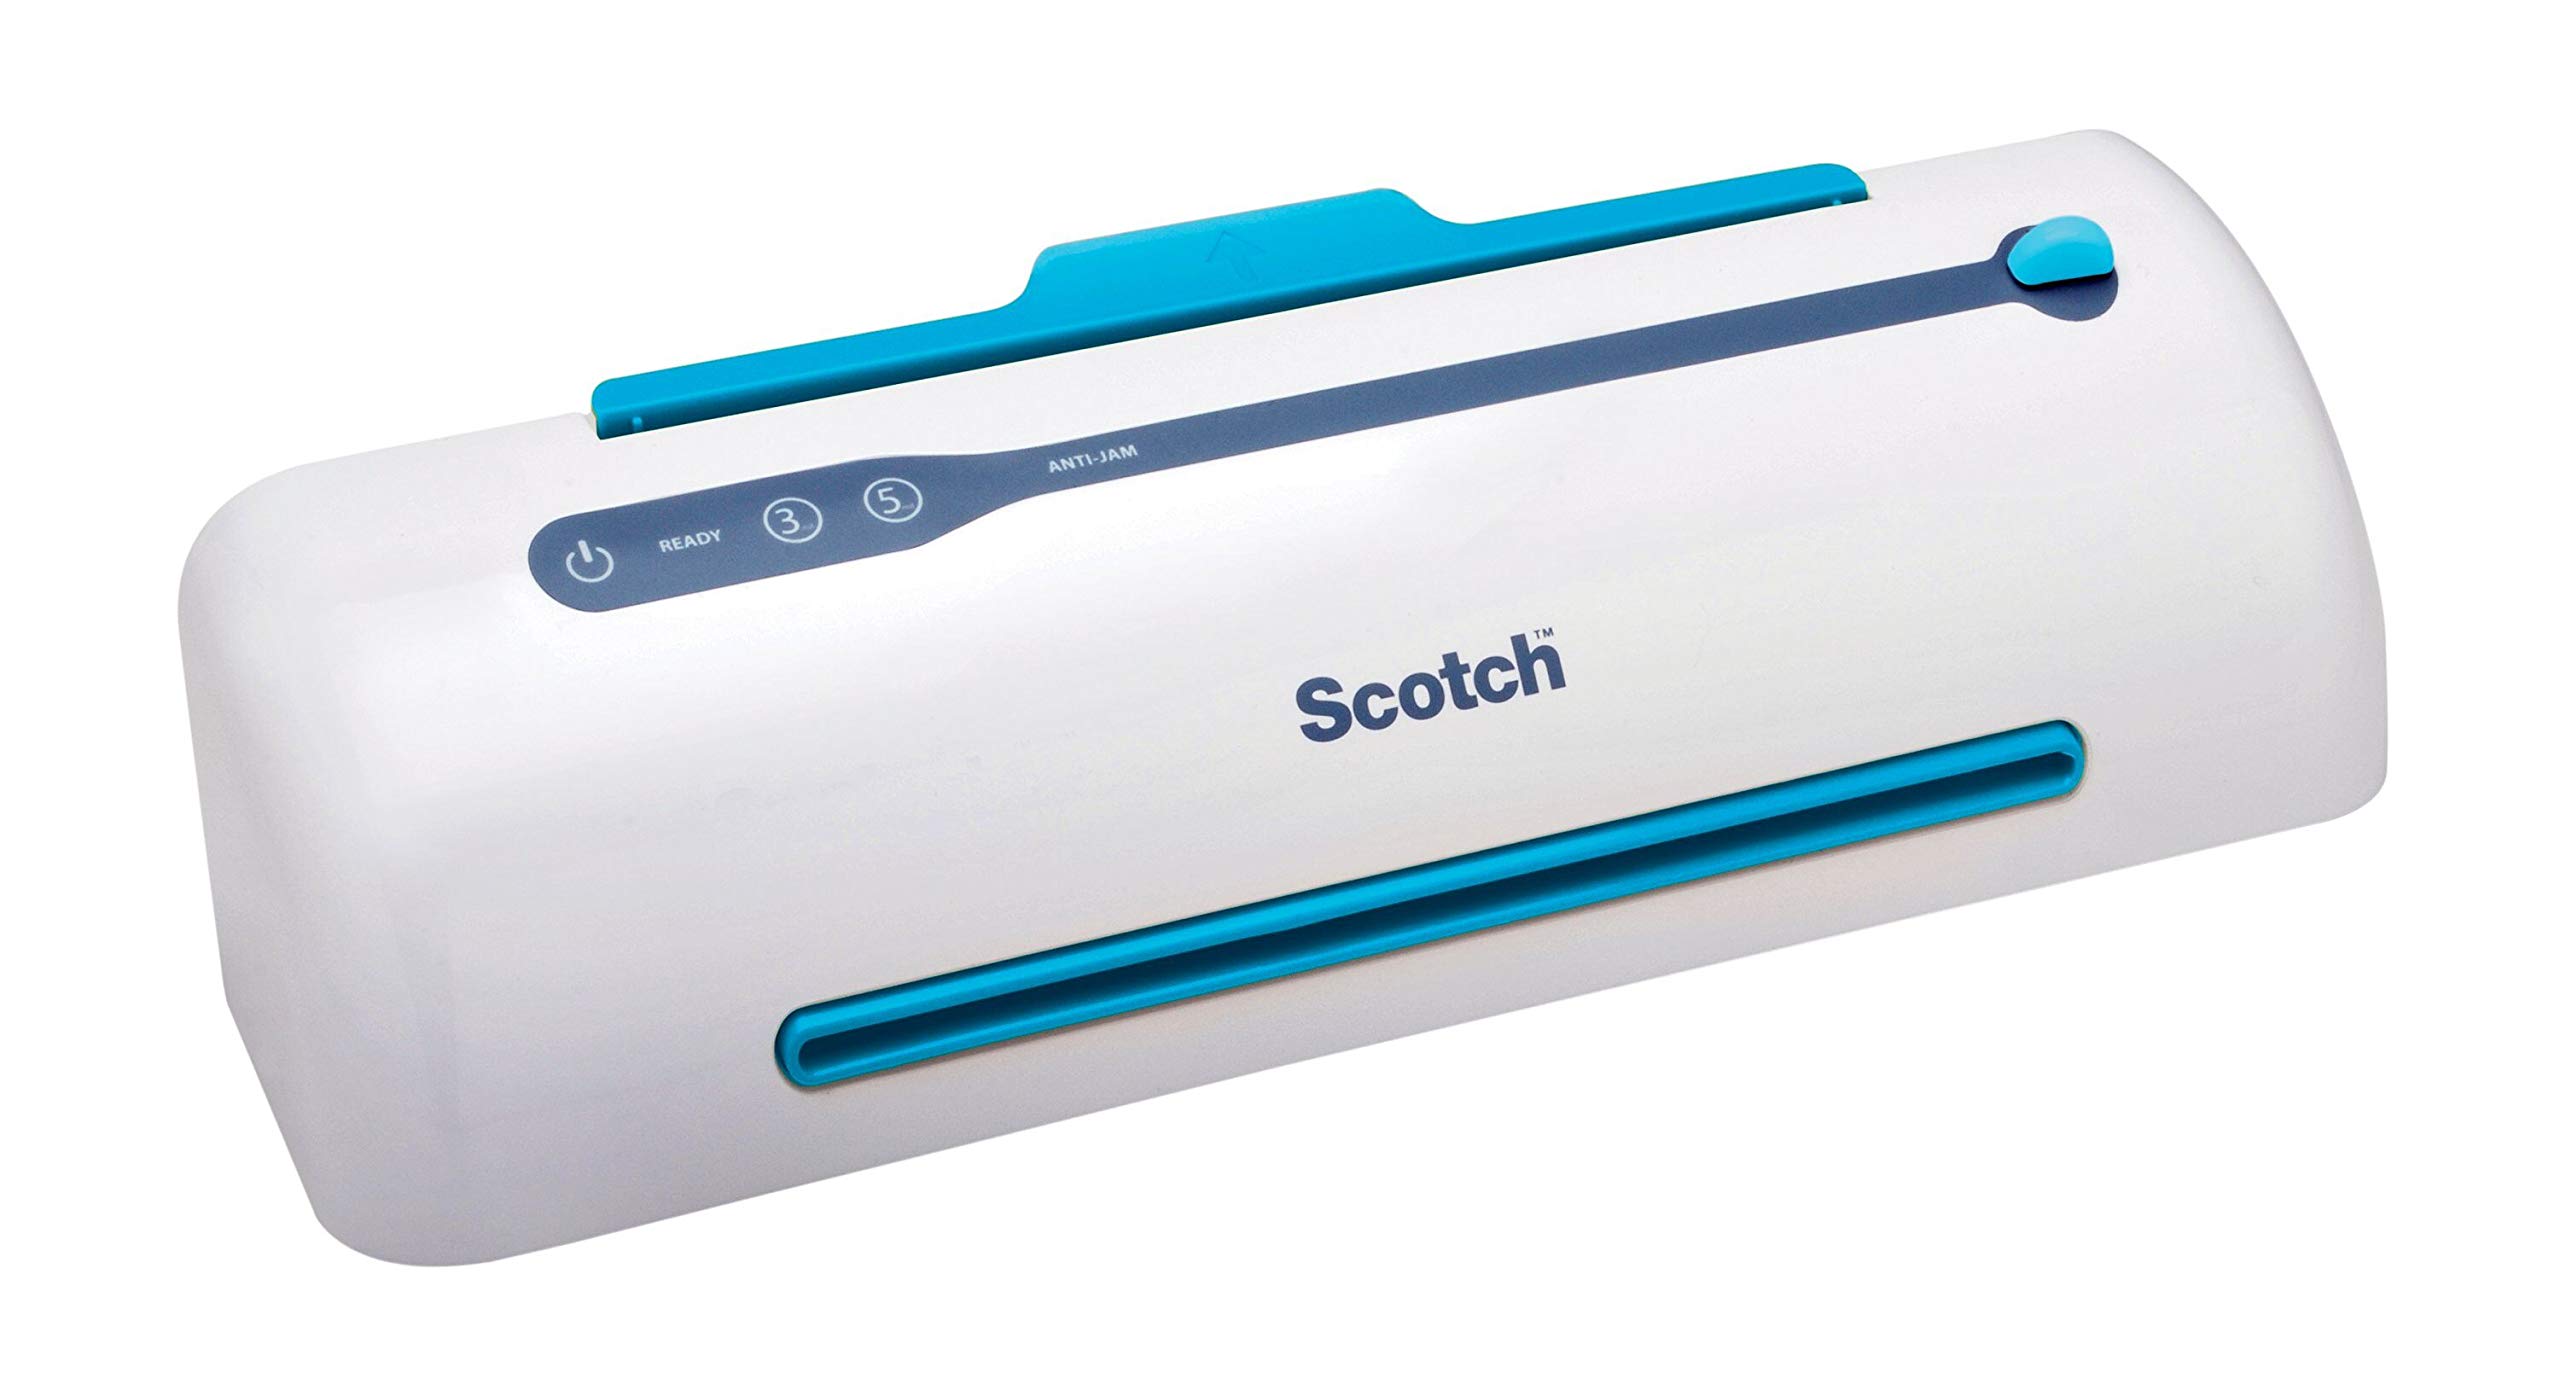 Scotch Brand PRO Thermal Laminator, Never Jam Technology Automatically Prevents Misfed Items, 2 Roller System, 9 inch (TL906), 4